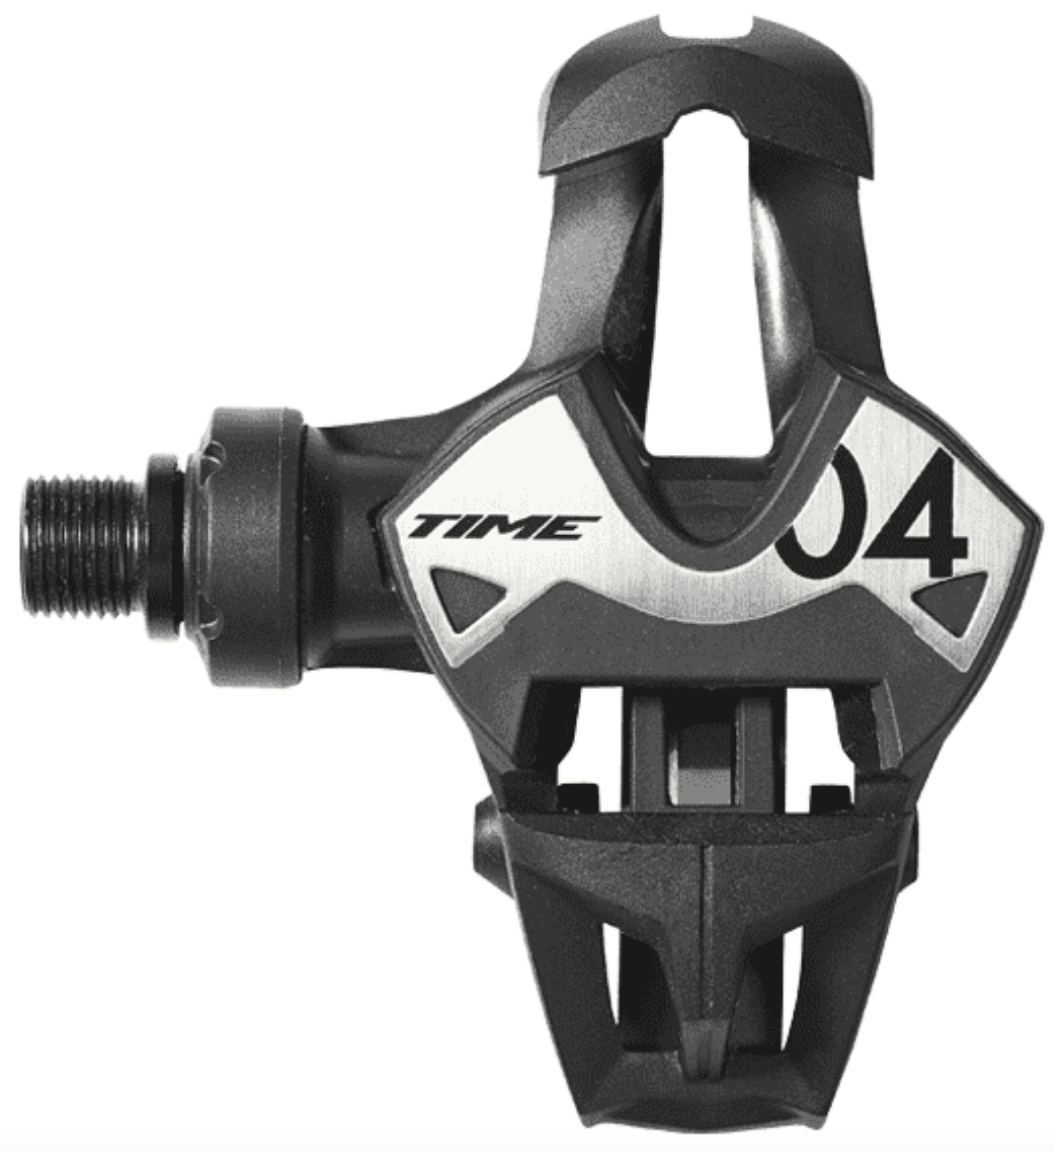 Time Xpresso 4 Road Pedal Iclic Steel